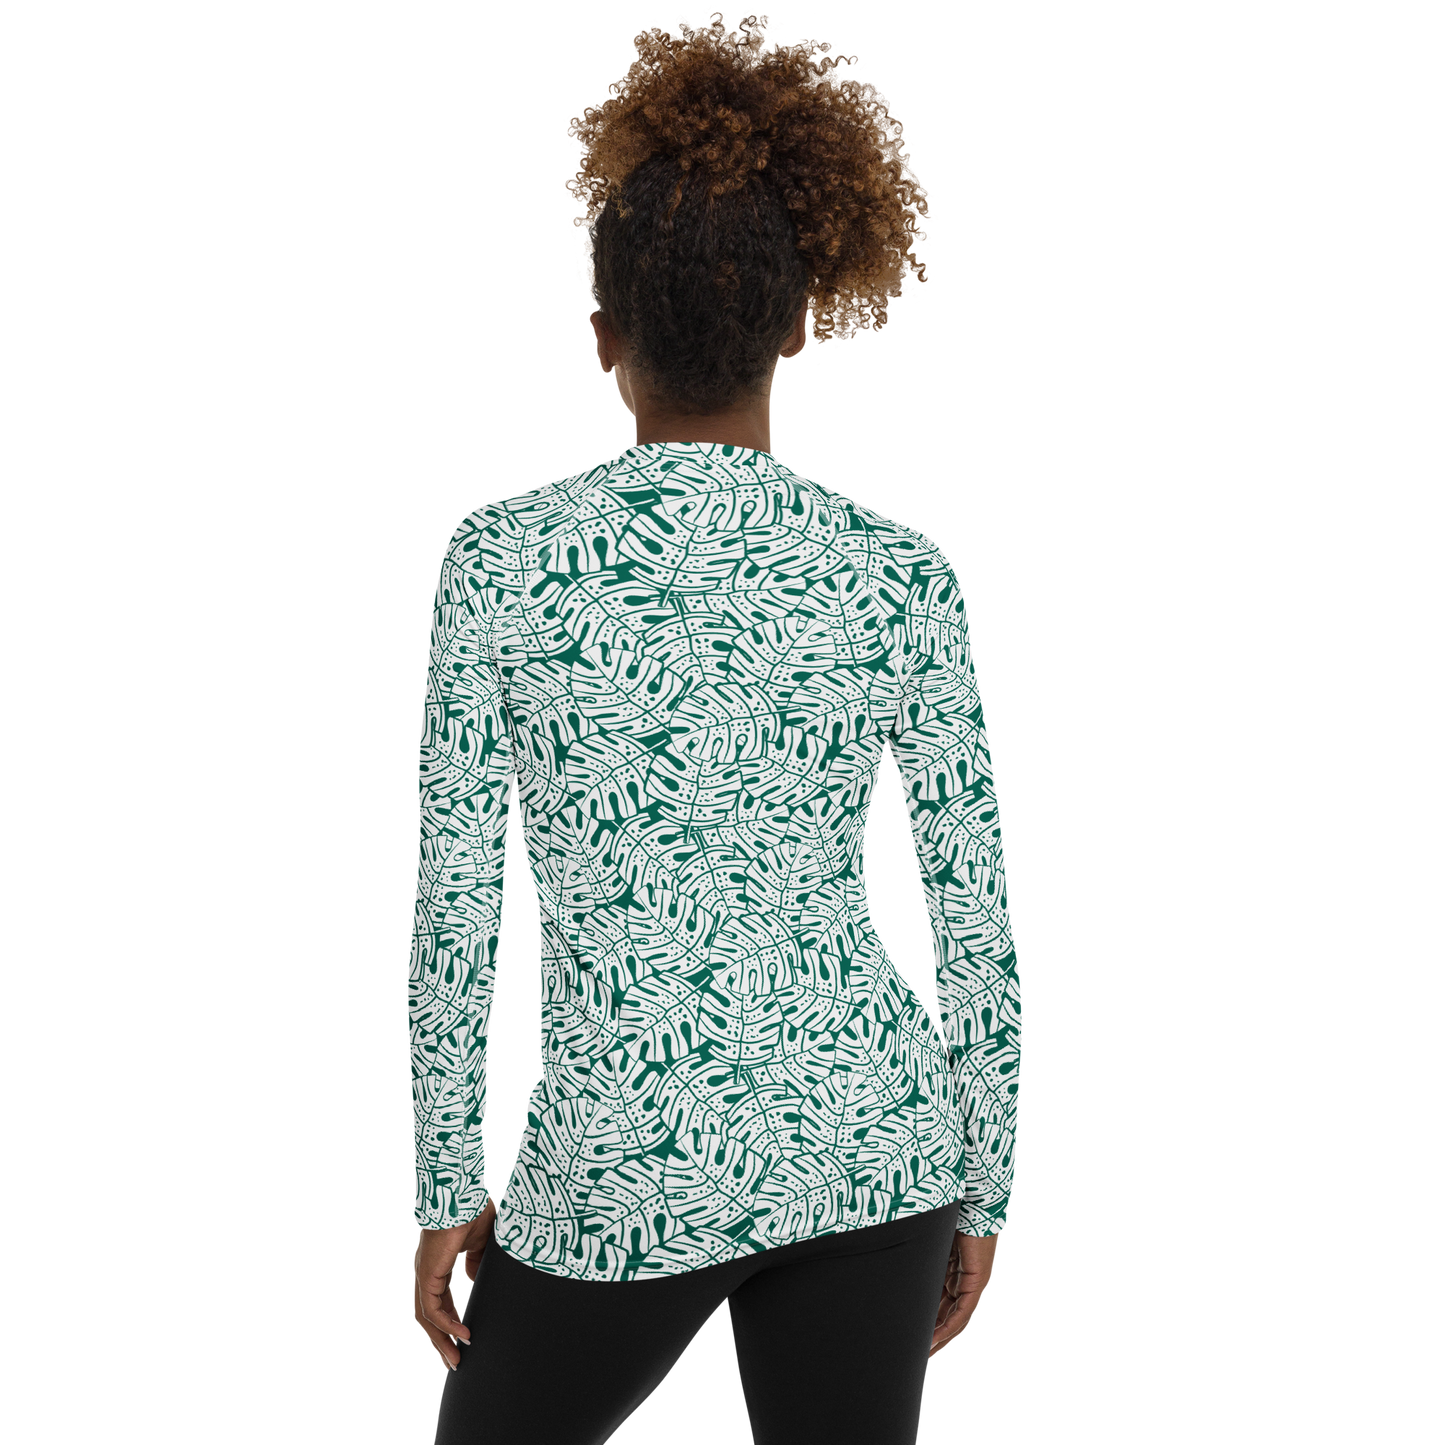 Colorful Fall Leaves | Seamless Patterns | All-Over Print Women's Rash Guard - #9